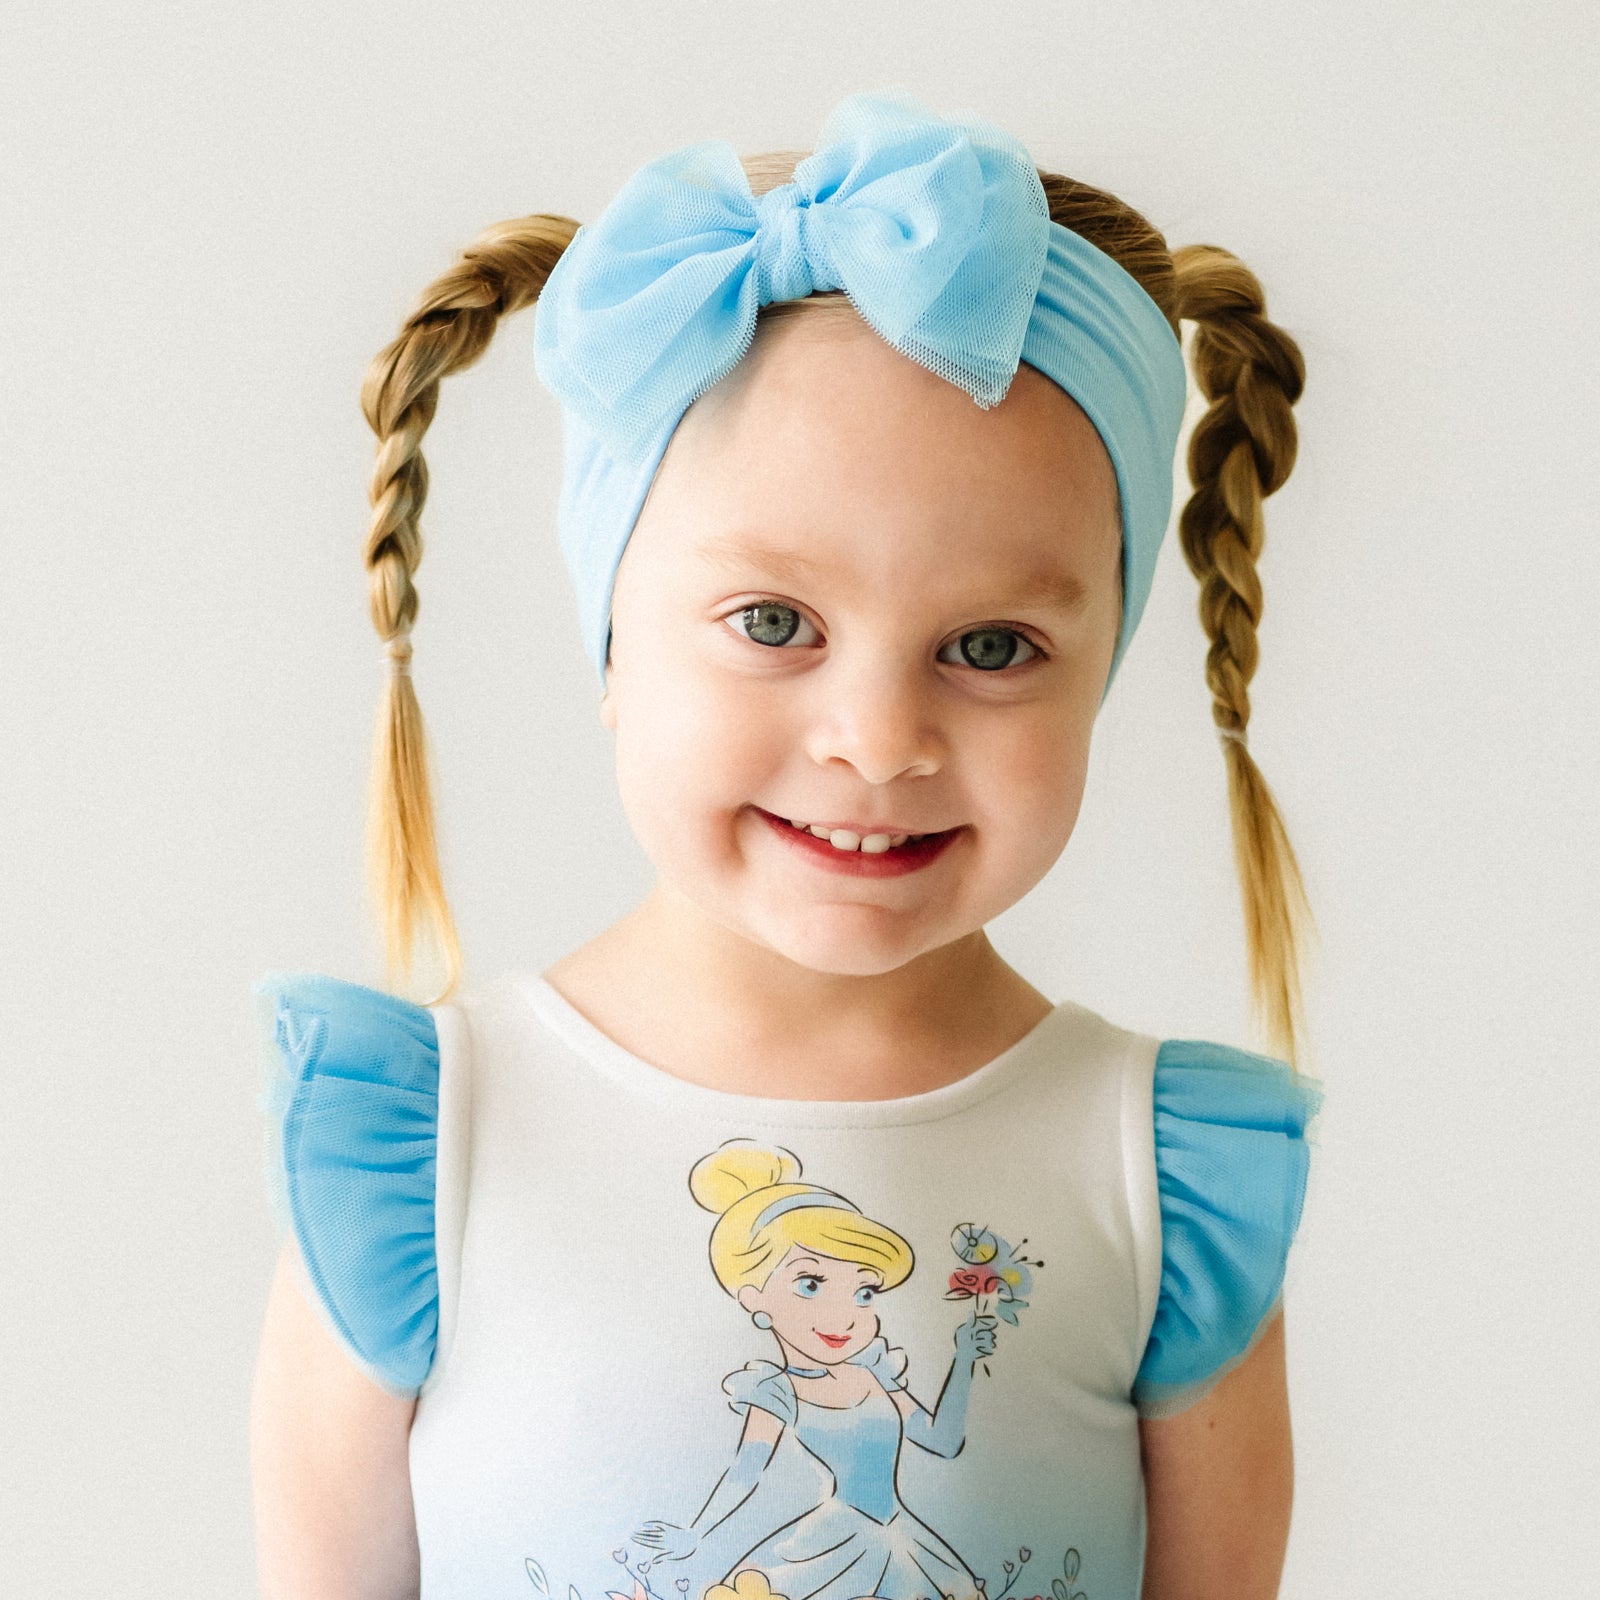 Alternate close up image of a child wearing a Blue tulle luxe bow headband and coordinating Play dress